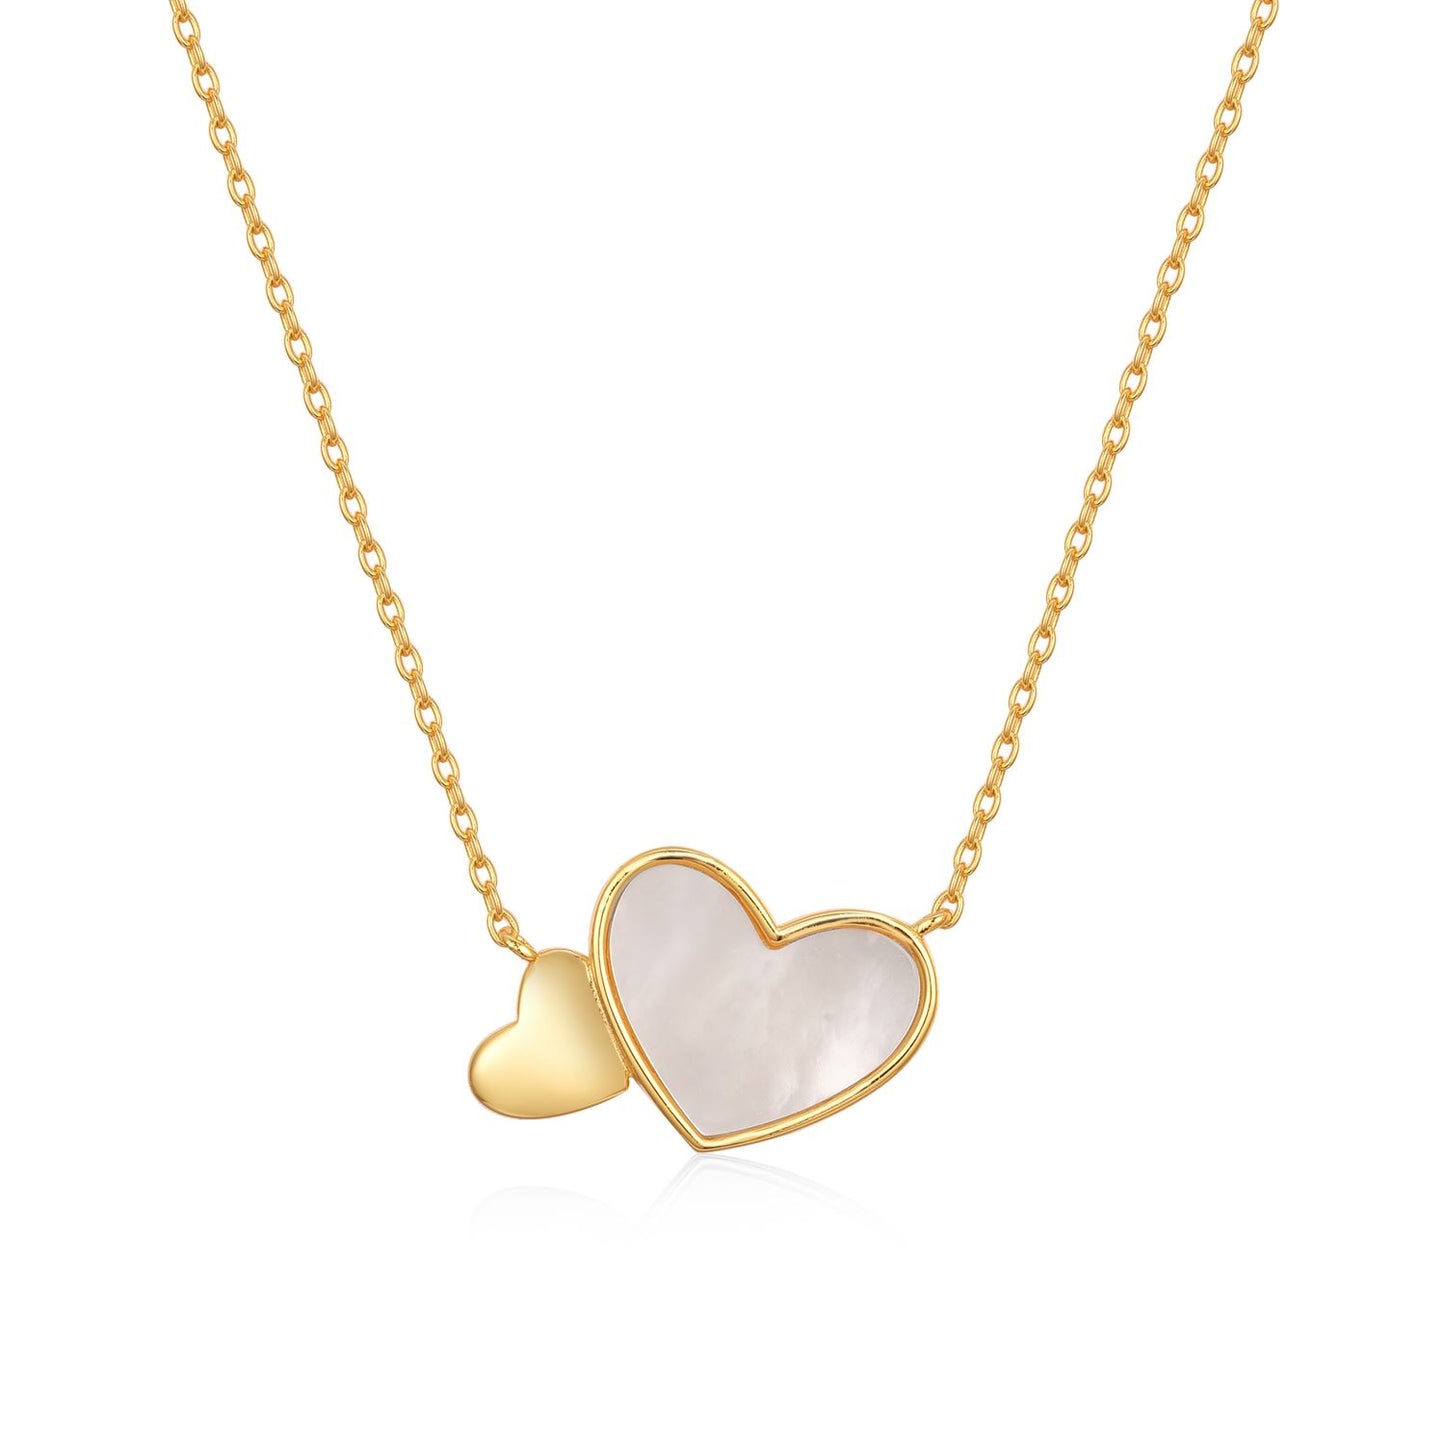 Exquisite Gold Heart Necklace